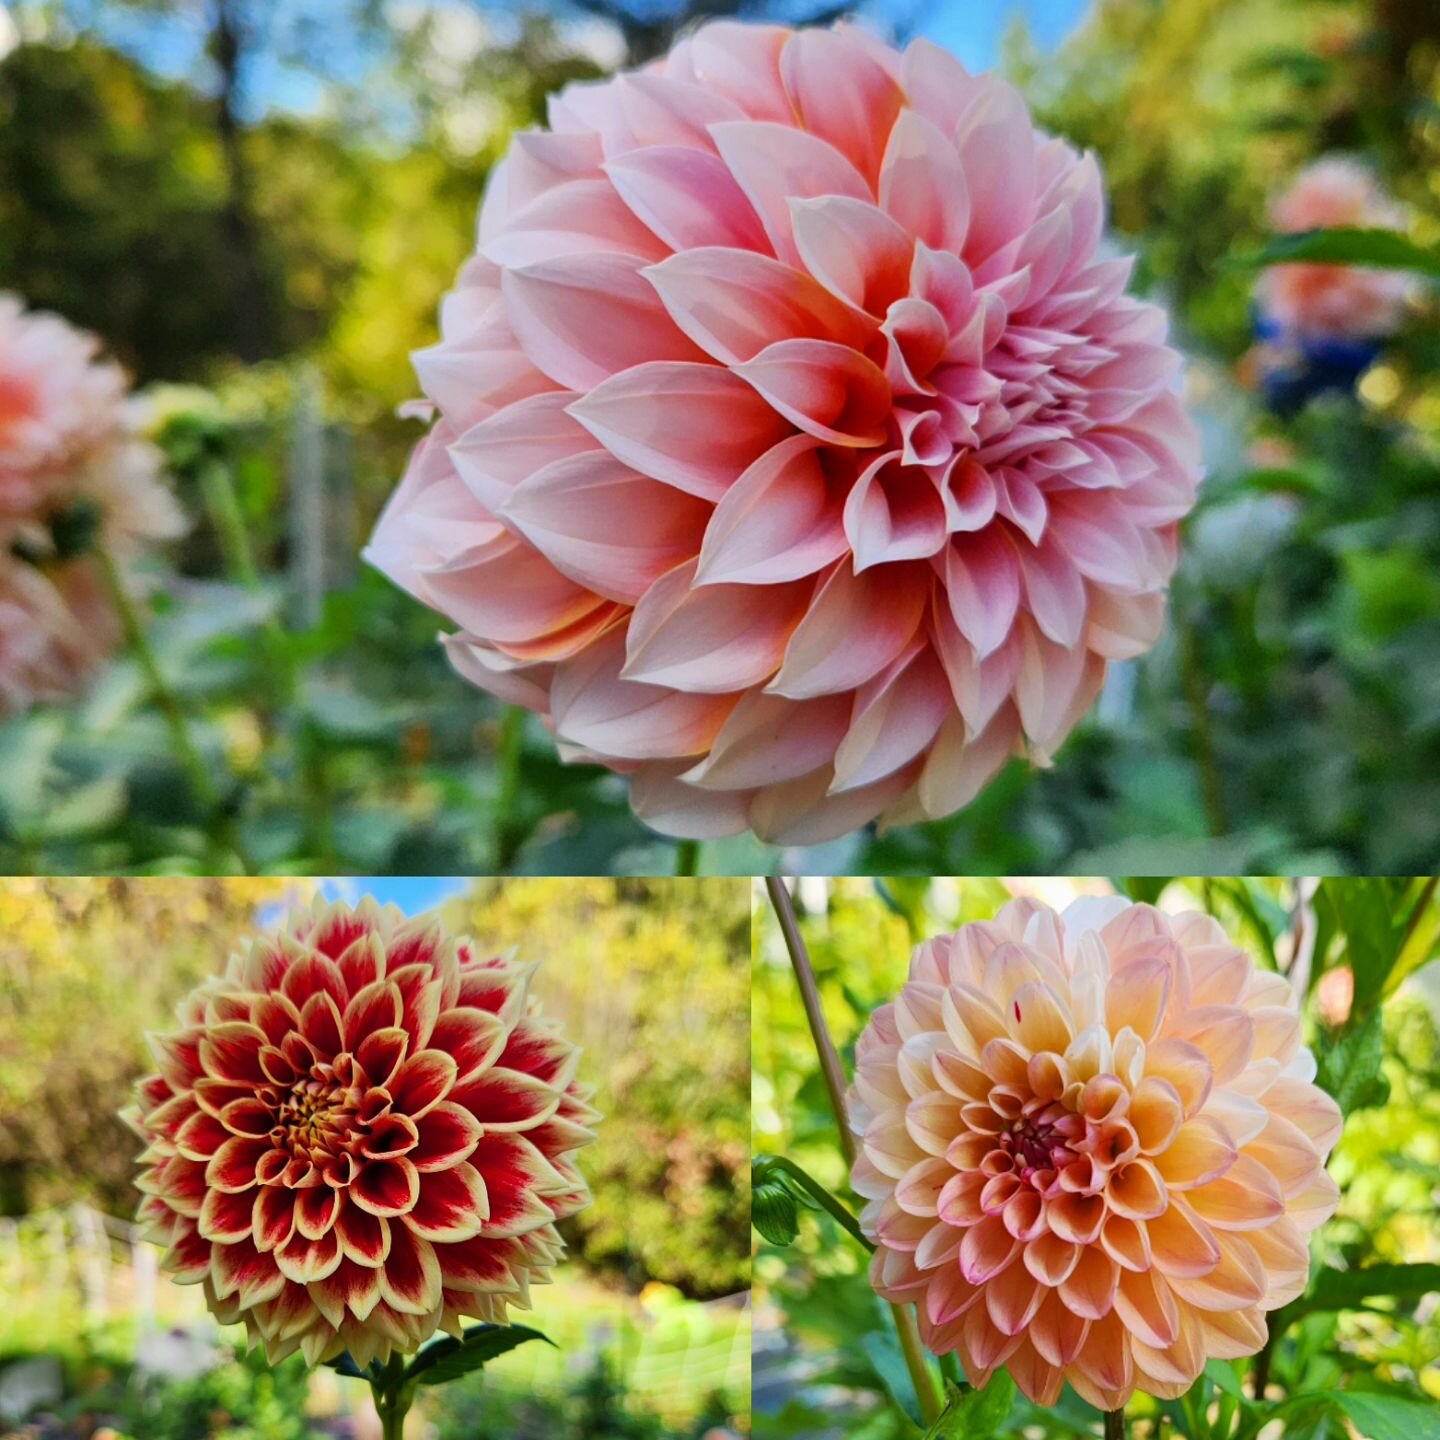 Dahlias Peaches N Cream, Jowey Hubert,  and Double Jill. Some of my favorite varieties for cutting in 2023. 

#specialtycutflowers #dahliasforcutting ##dahliasforever #dahlias #dahliatubersales ##dahliasfordays #wisconsingrowndahlias #wisconsinlocalf